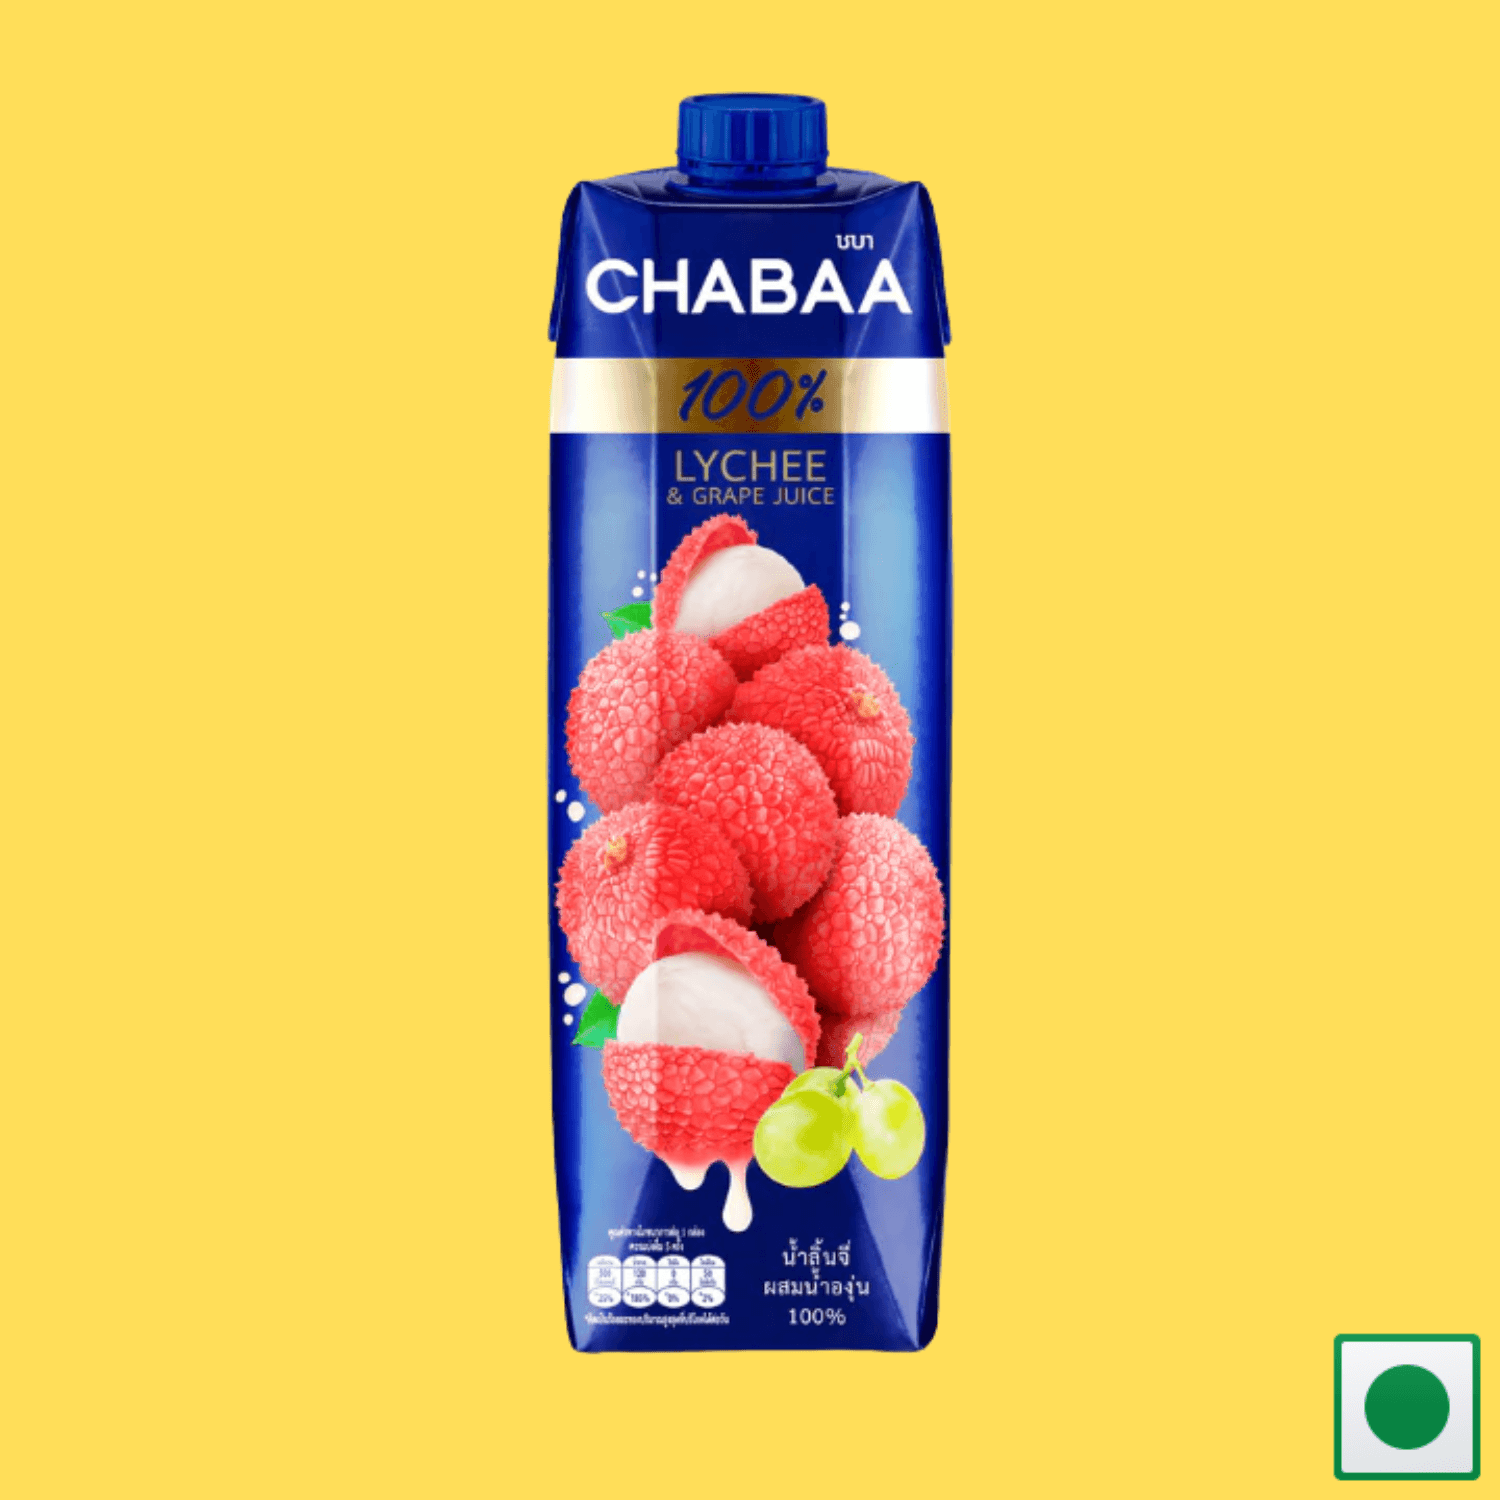 Chabaa Lychee & Grape Juice 1L (Imported) - Super 7 Mart